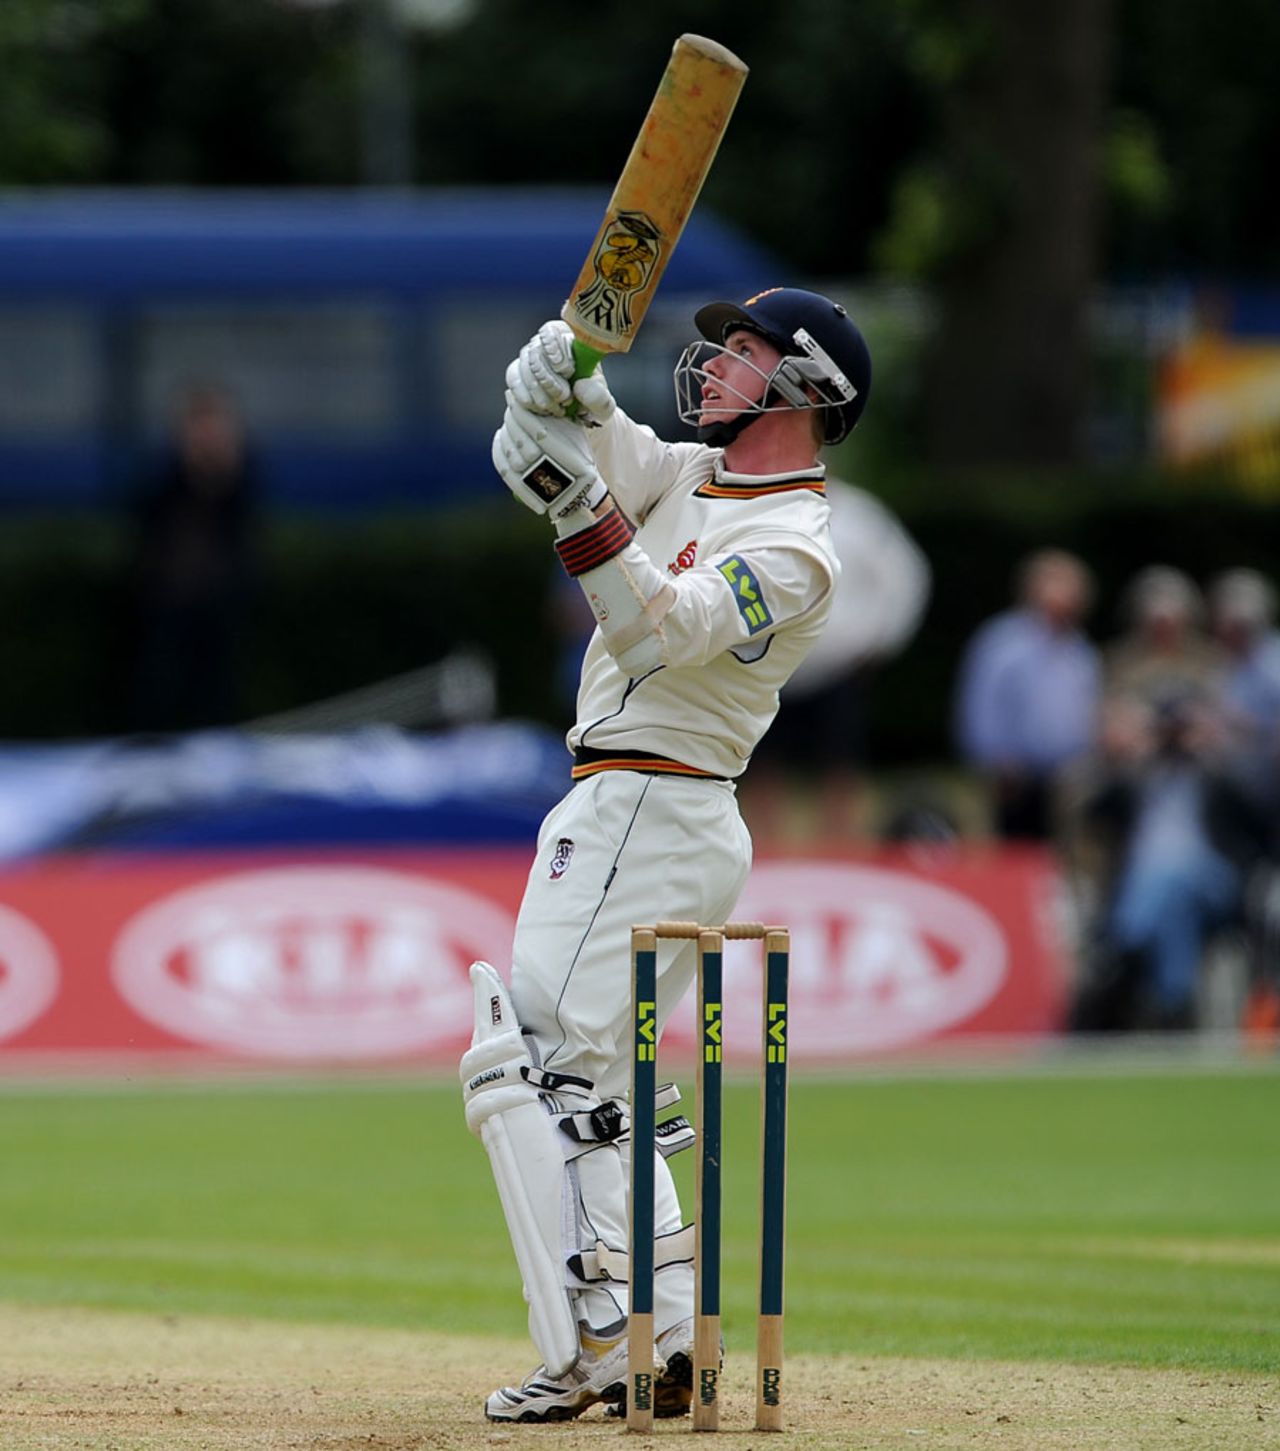 Adam Wheater plays the hook shot, Surrey v Essex, County Championship, Division Two, Whitgift School, 1st day, May 18, 2012